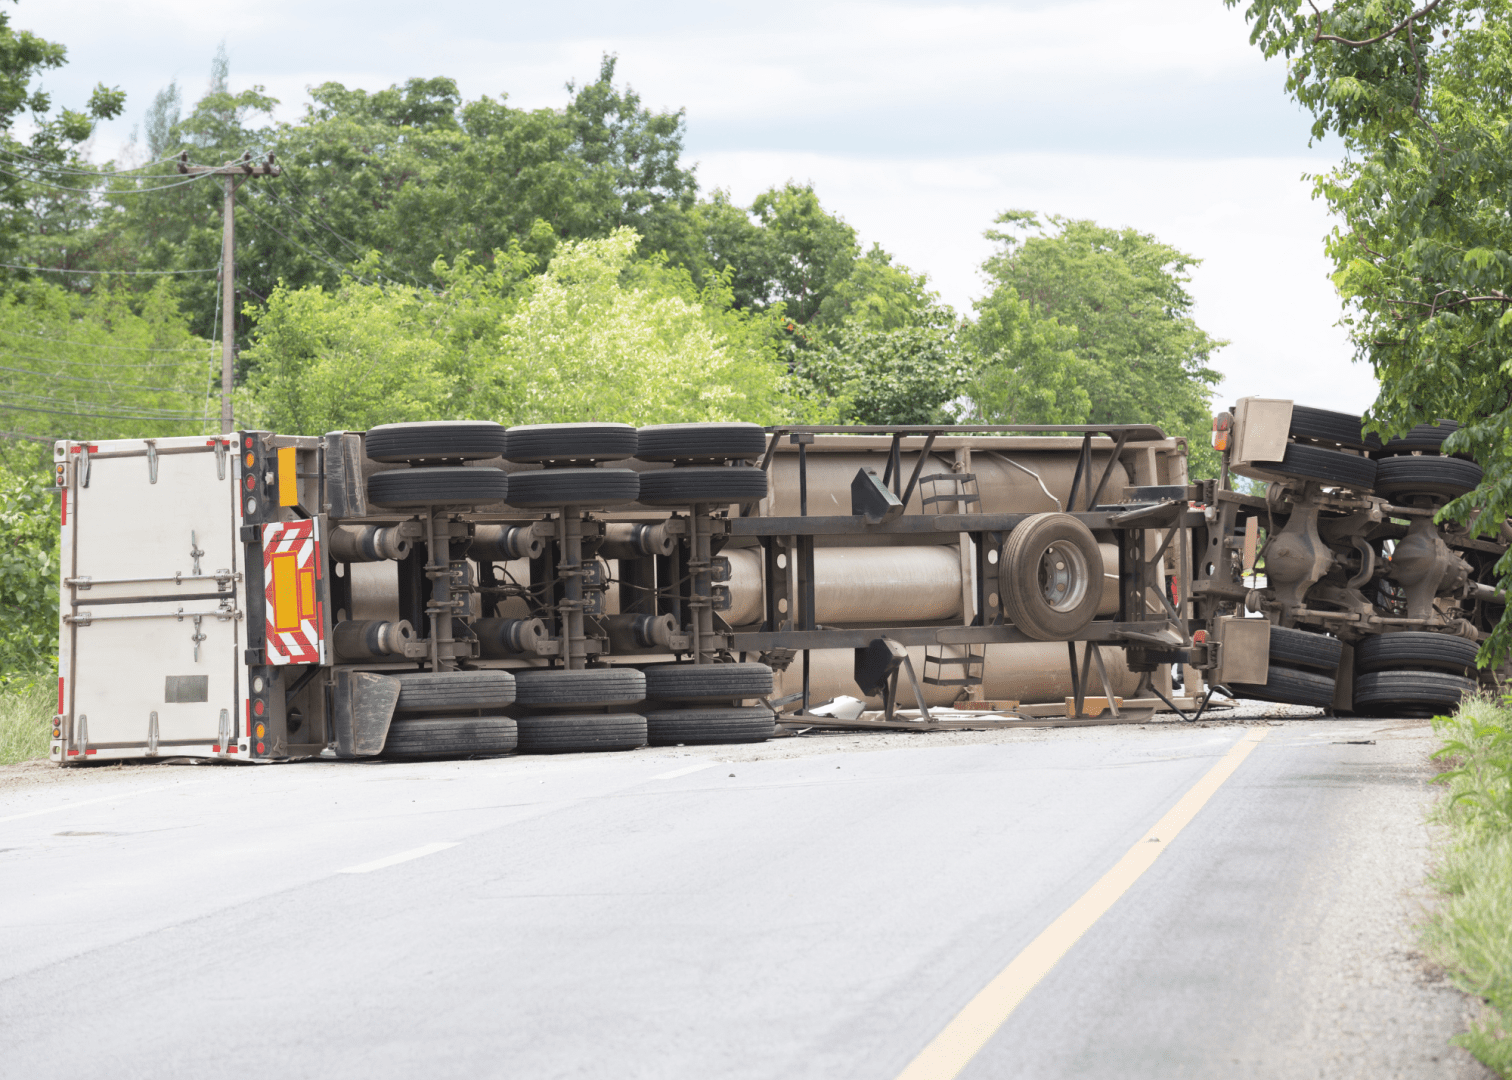 Overturned Commericial Truck - Charlotte Truck Accident Attorney